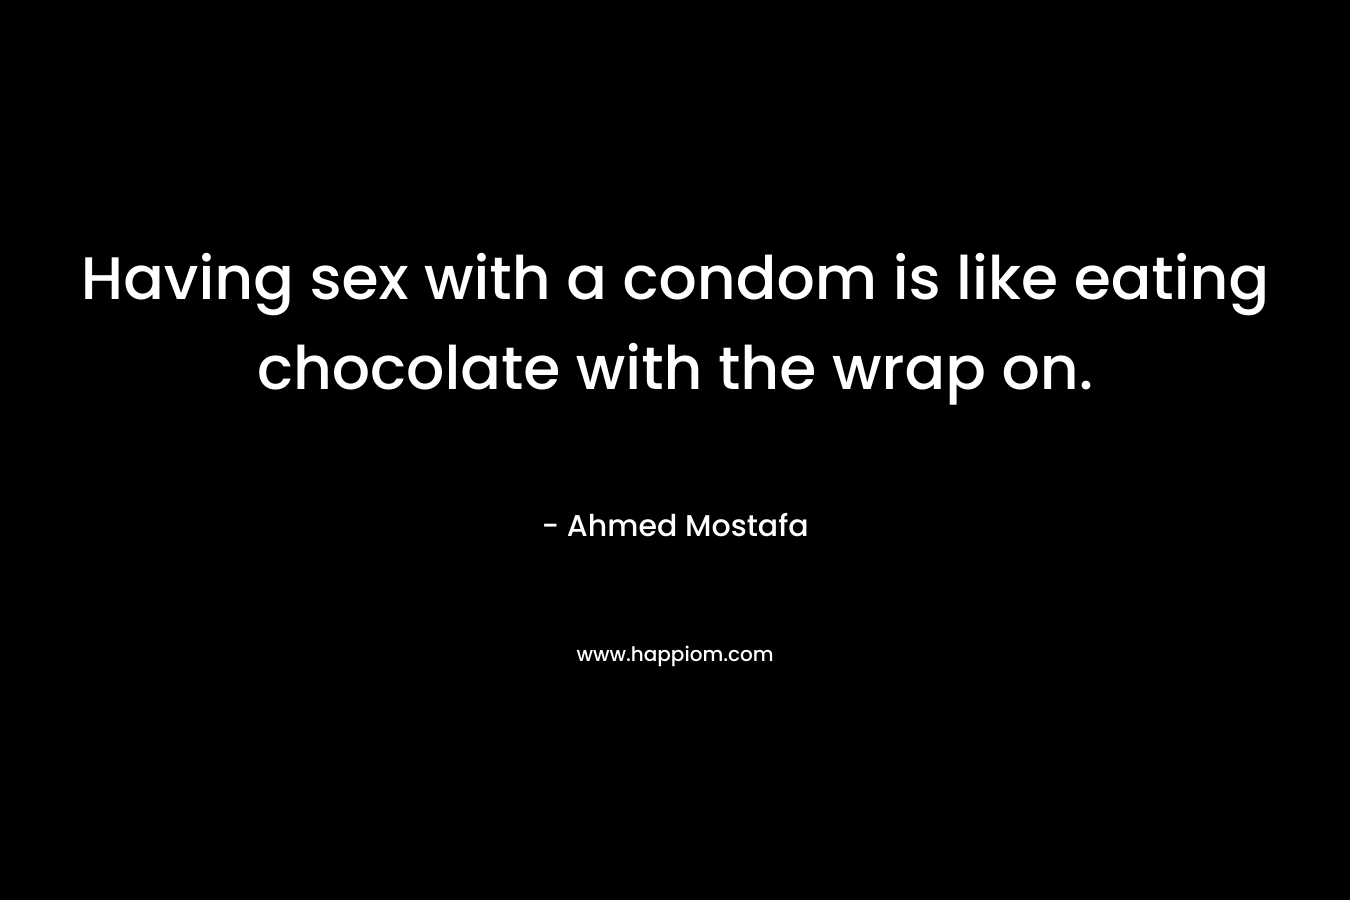 Having sex with a condom is like eating chocolate with the wrap on.